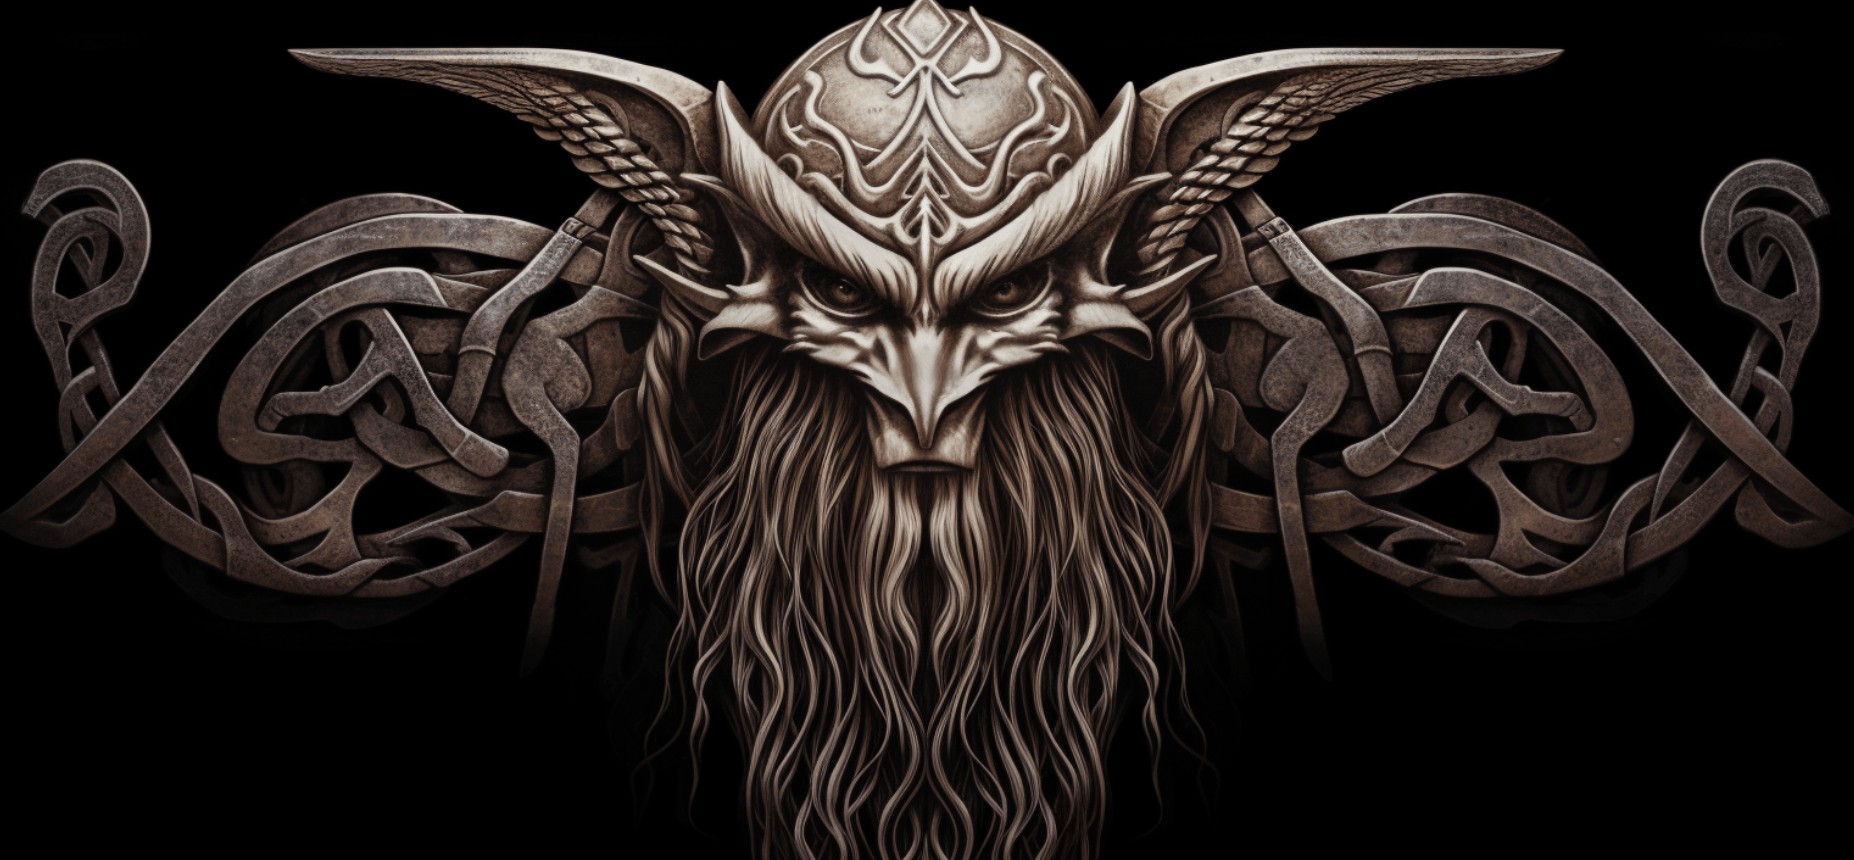 traditional norse tattoo designs